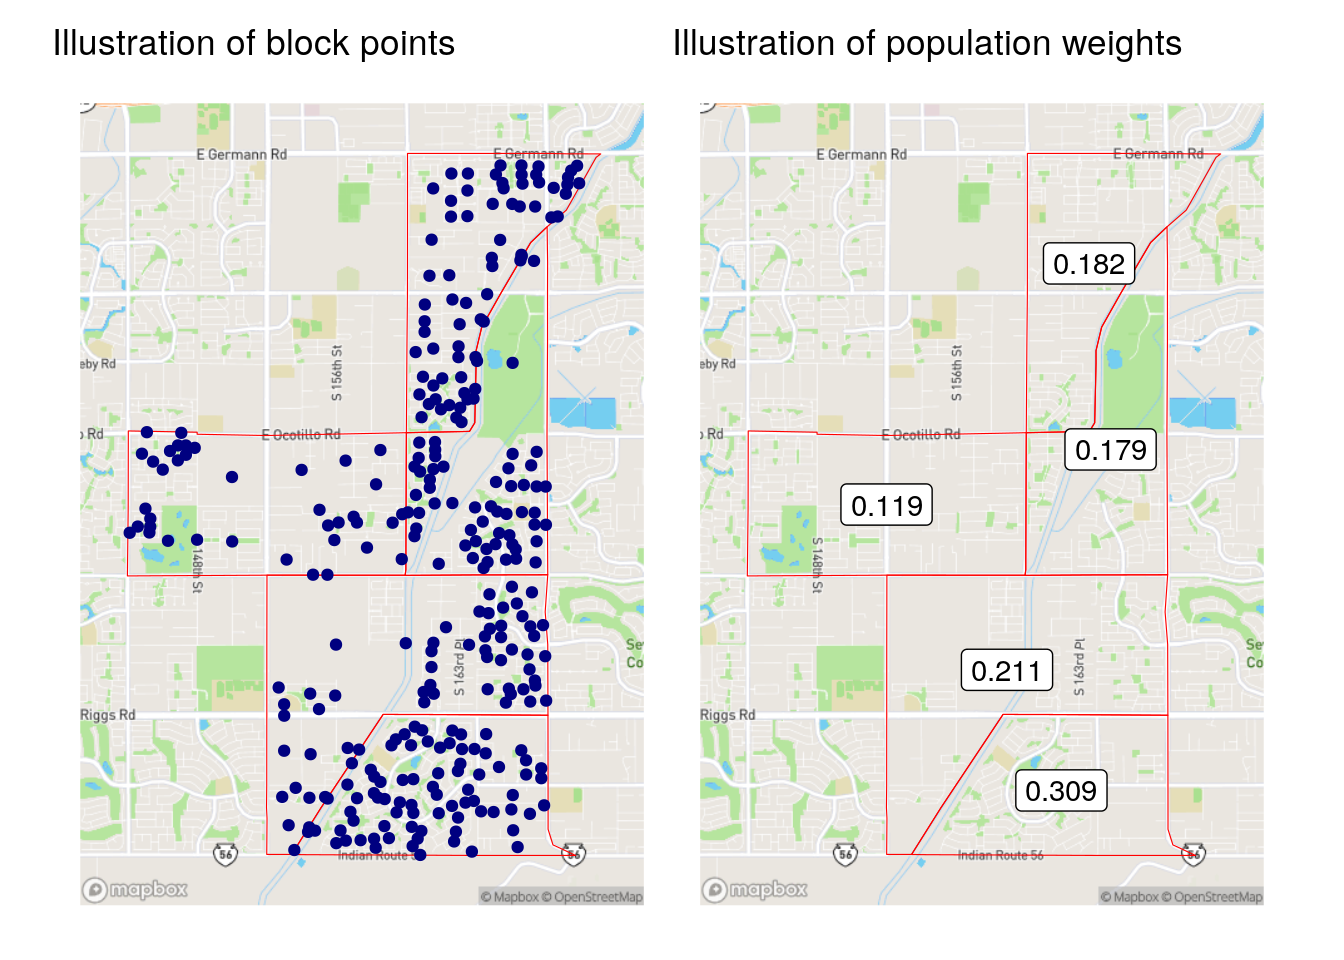 Illustration of block points and population weights